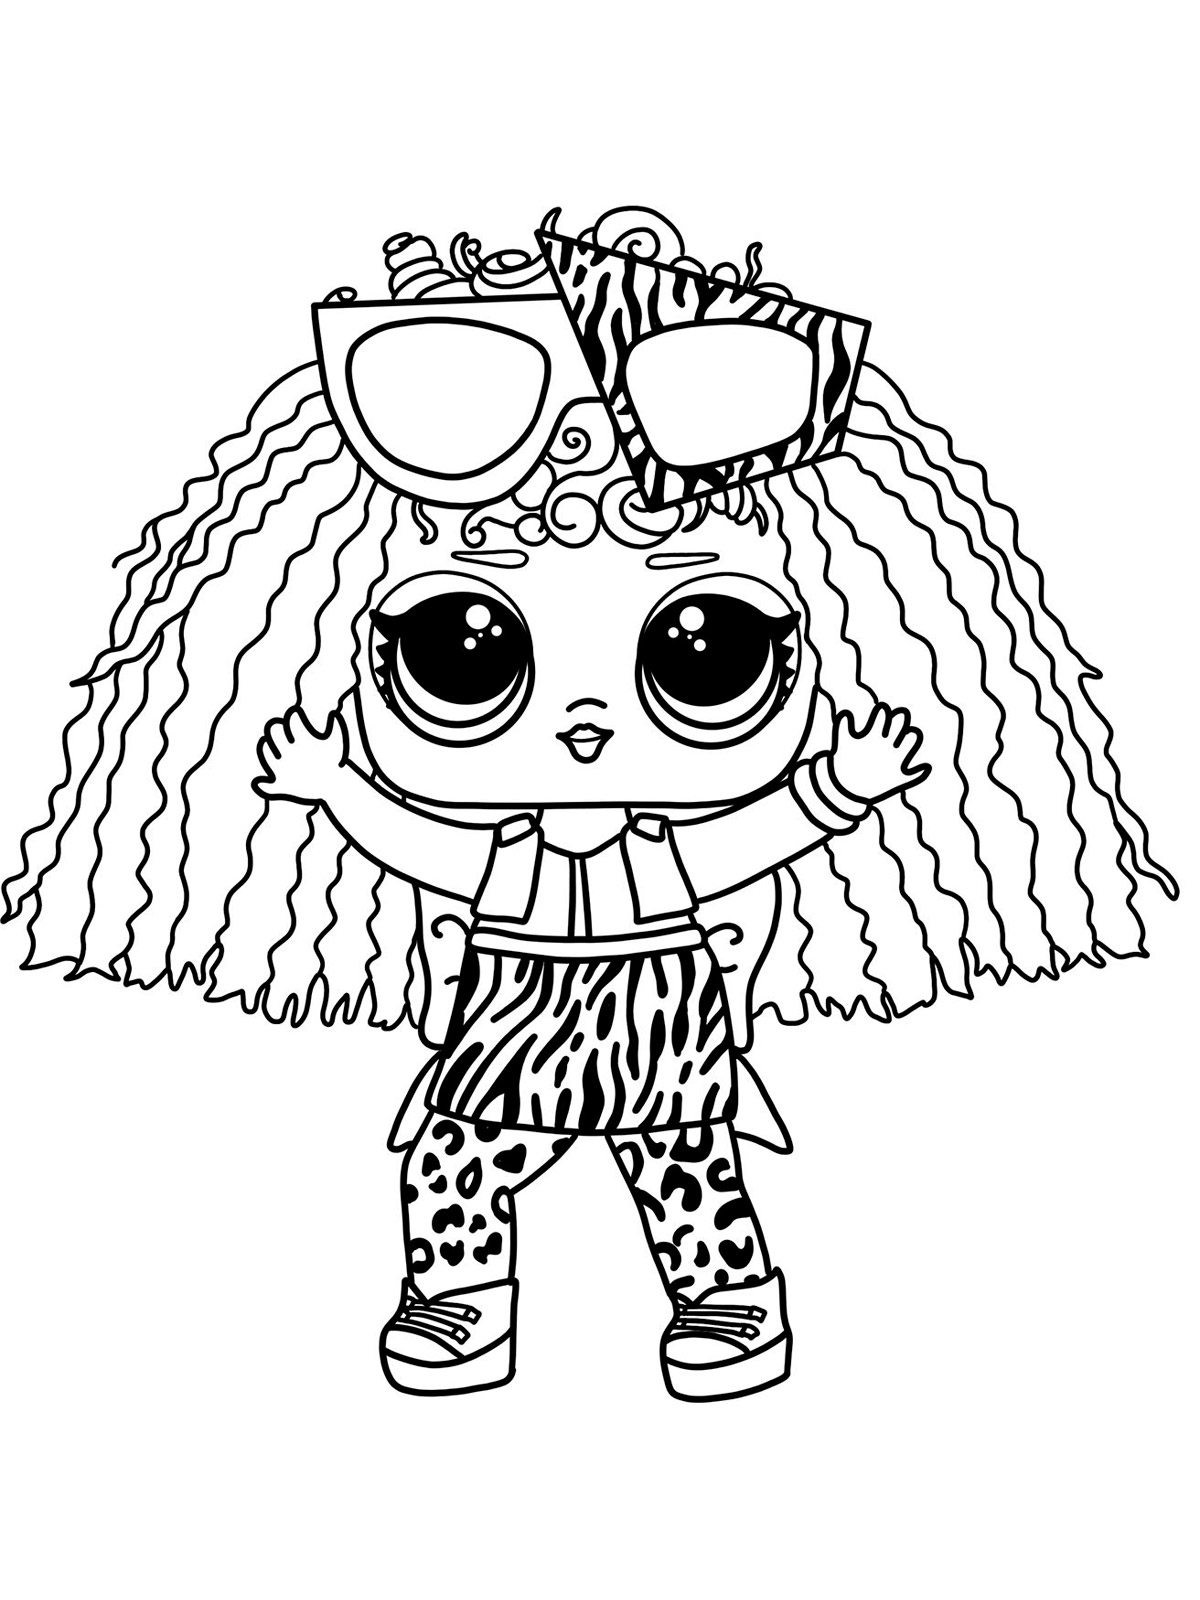 Lol Rocker Doll Coloring Page